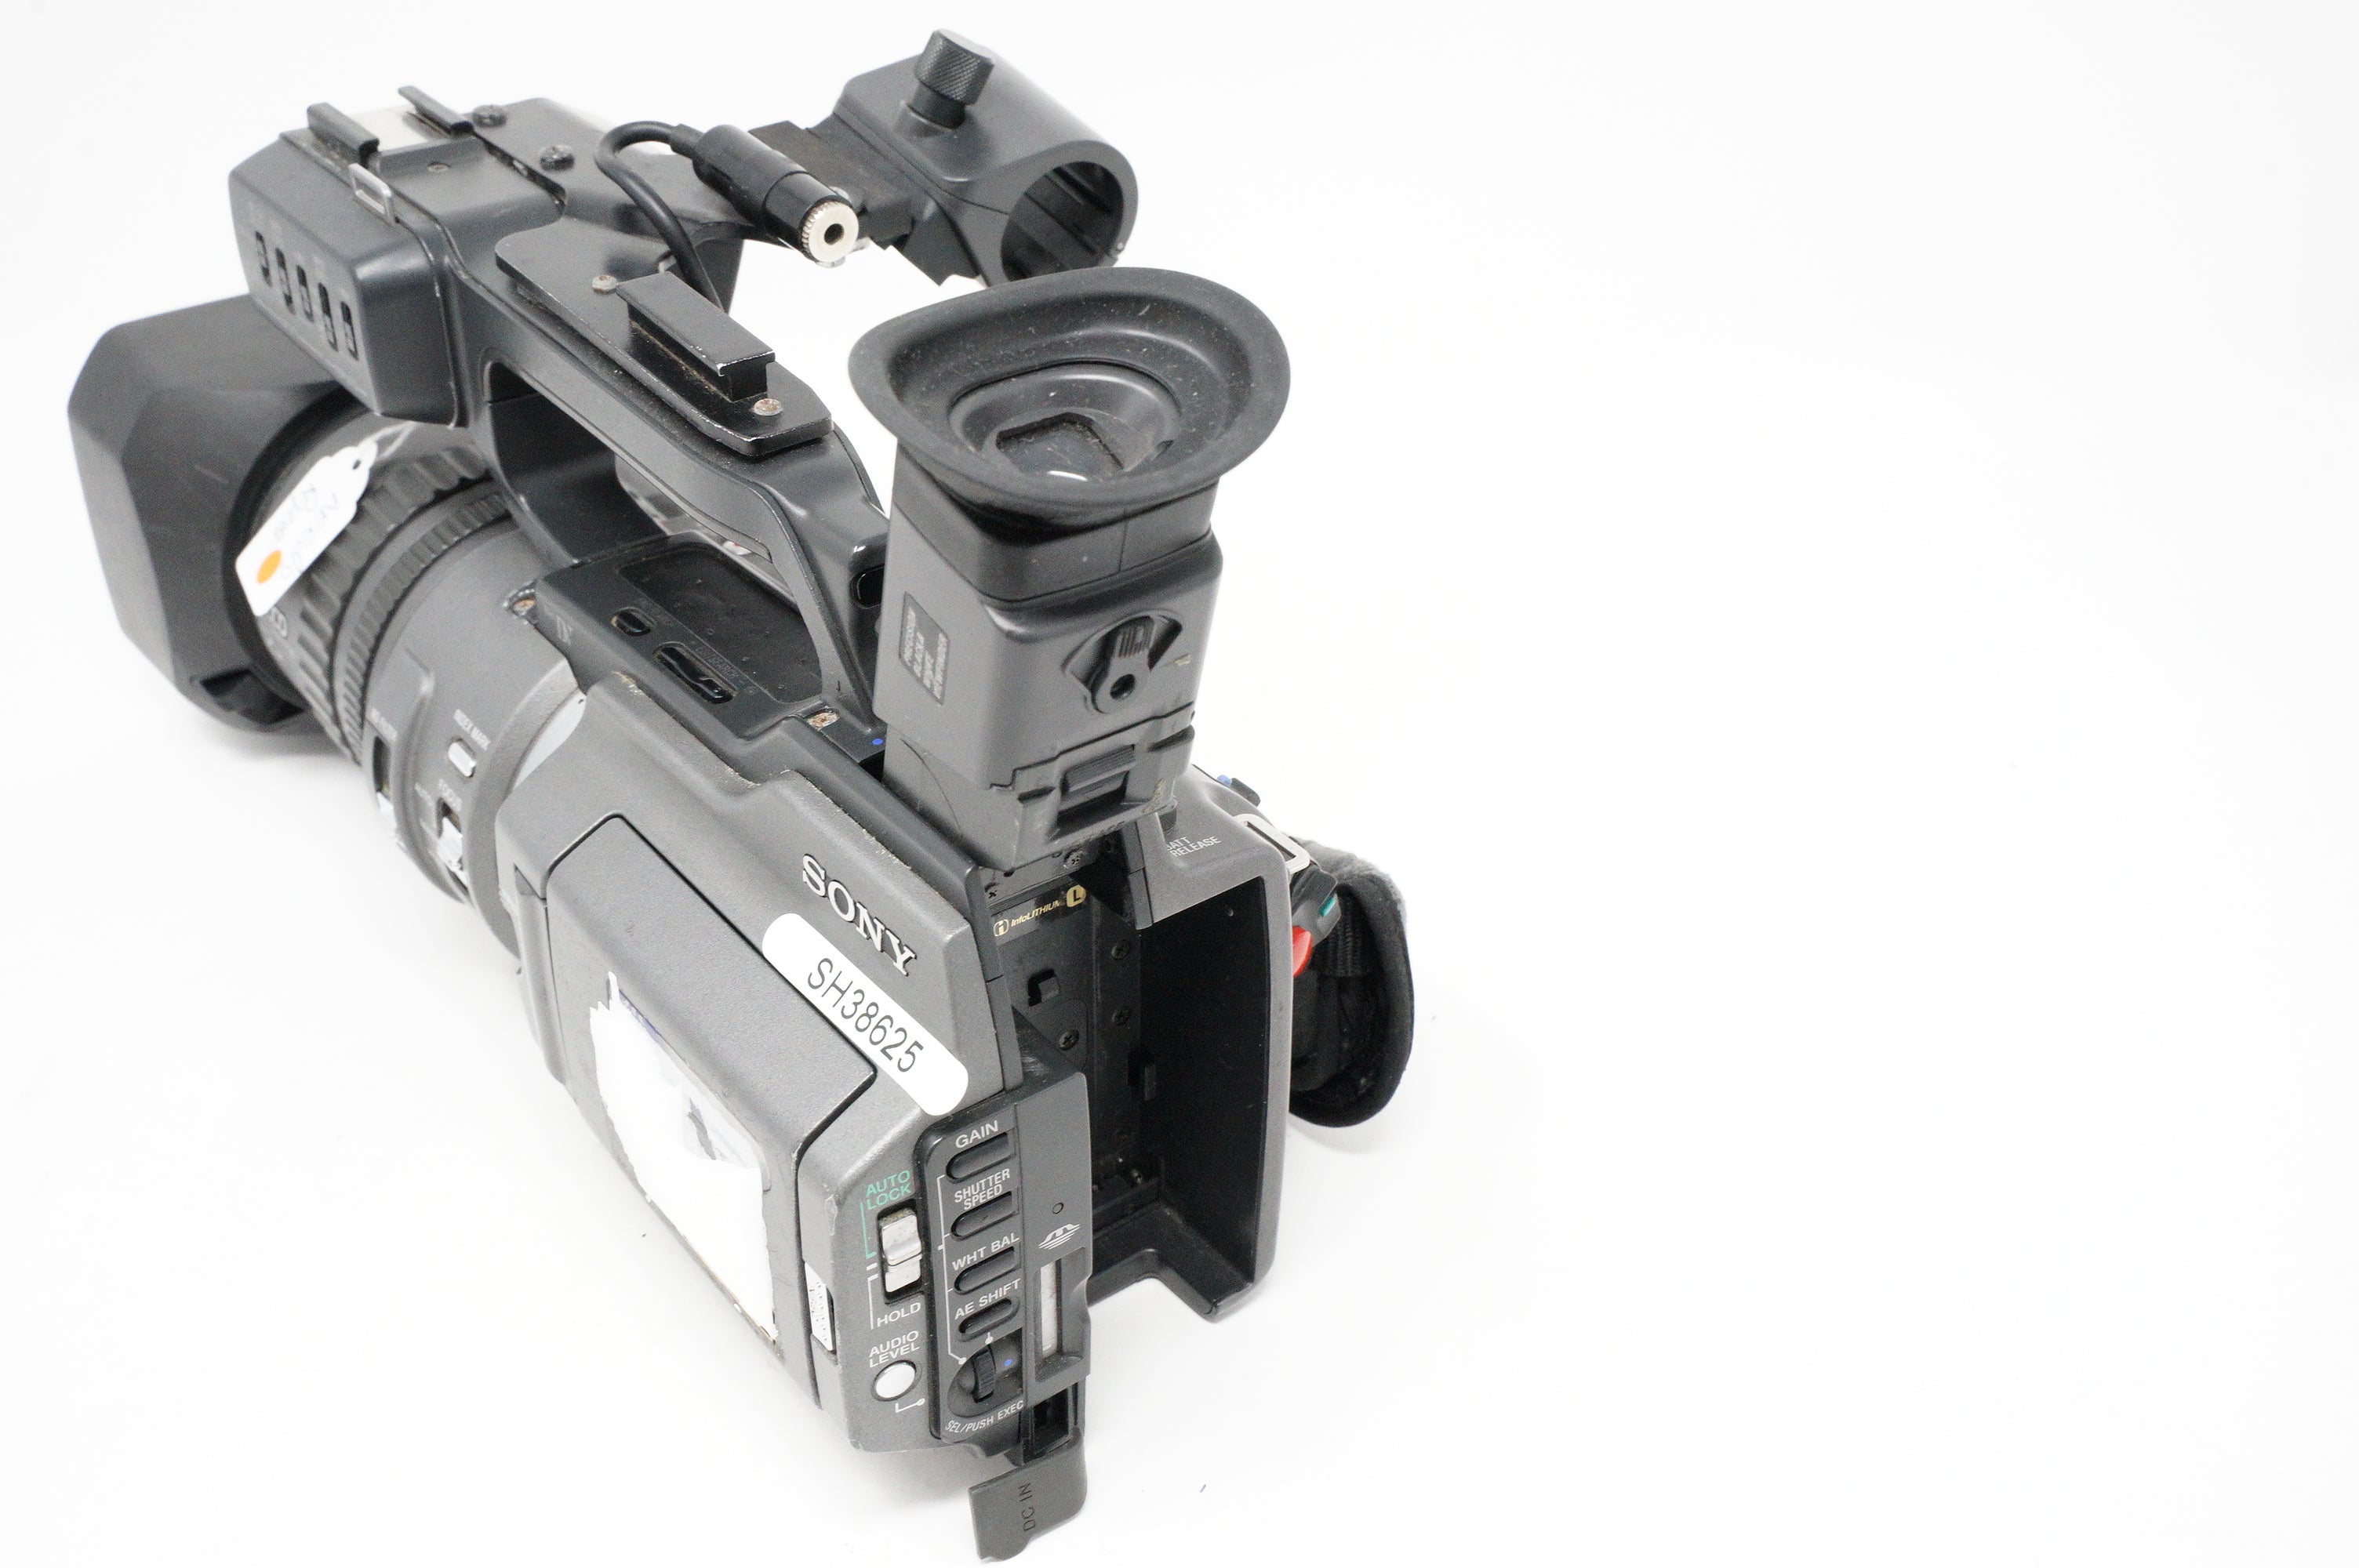 Used Sony DSR-PD150P camcorder + charger (Needs repair)(SH38625)